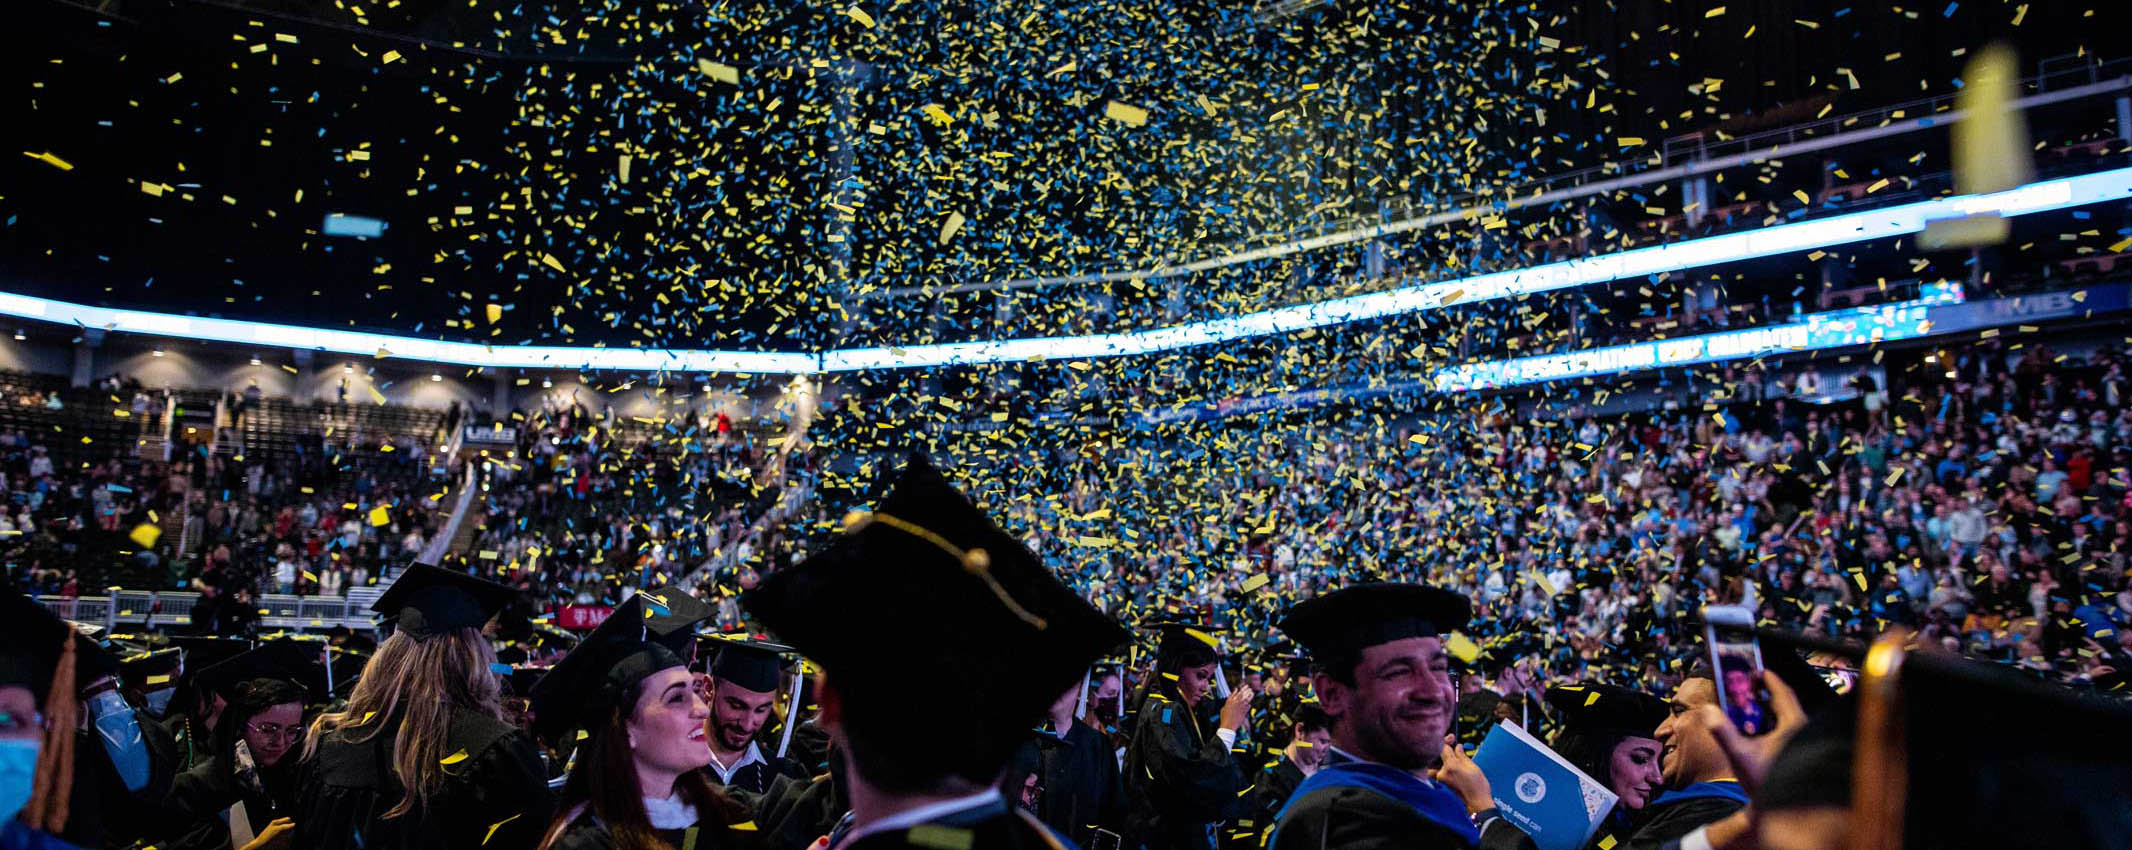 umkc mid year commencement